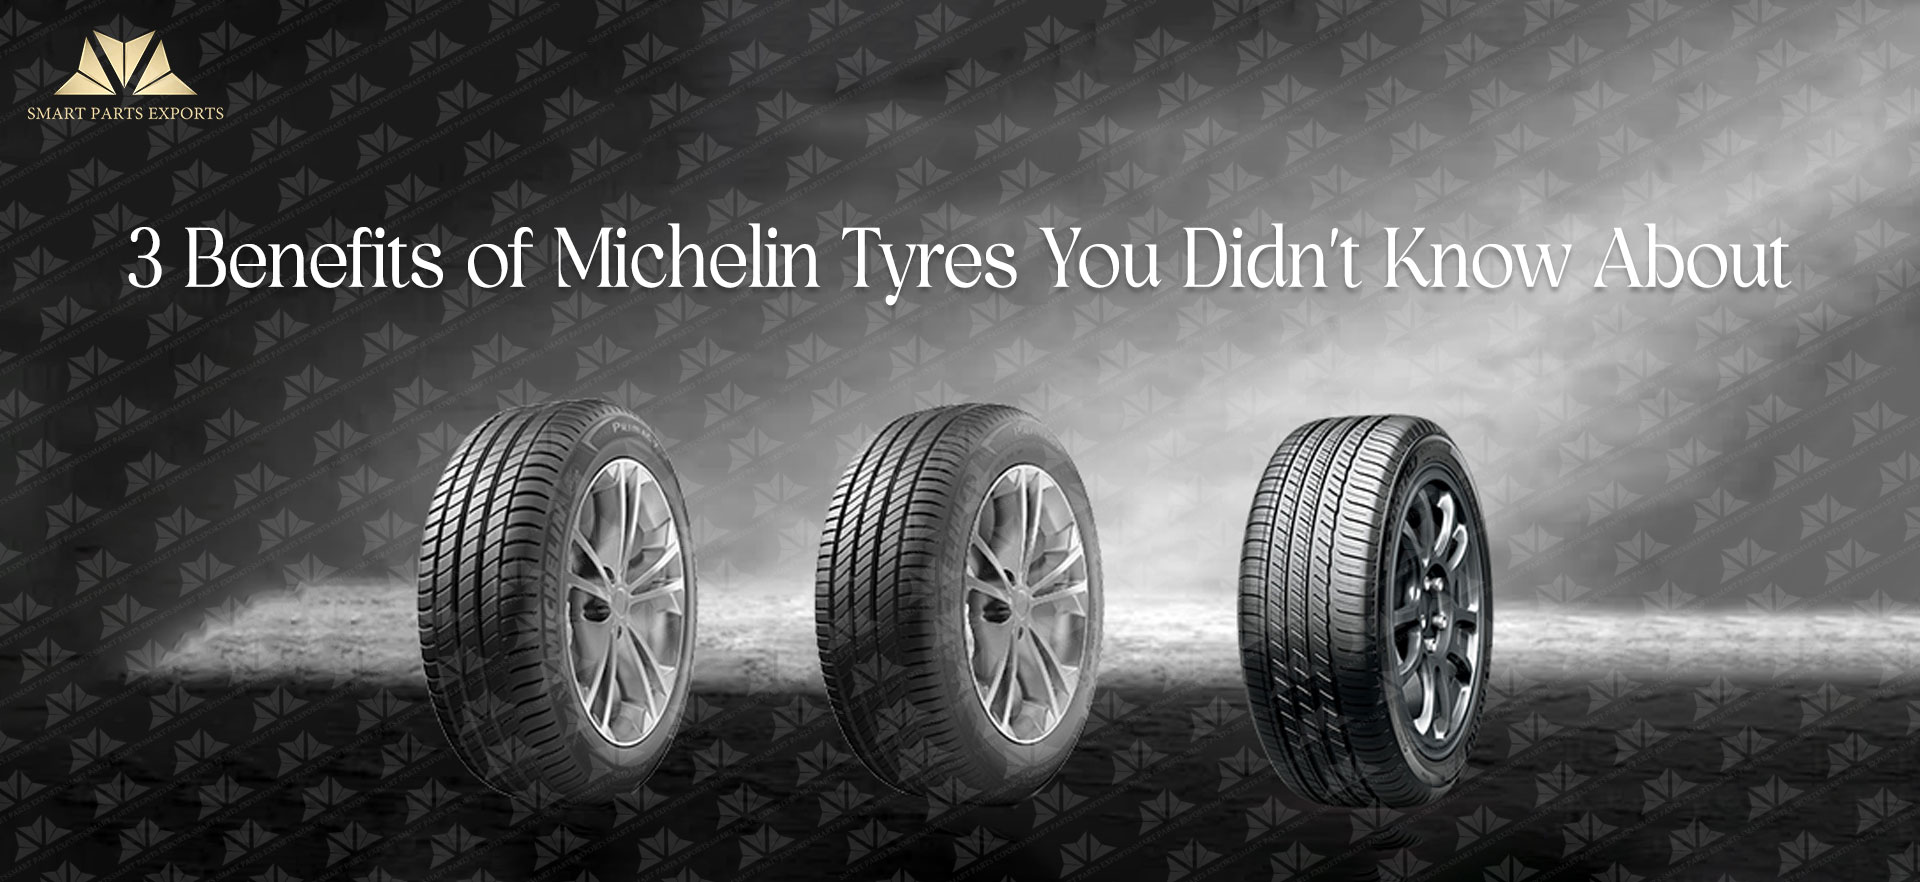 3 Benefits of Michelin Tyres You Didn't Know About